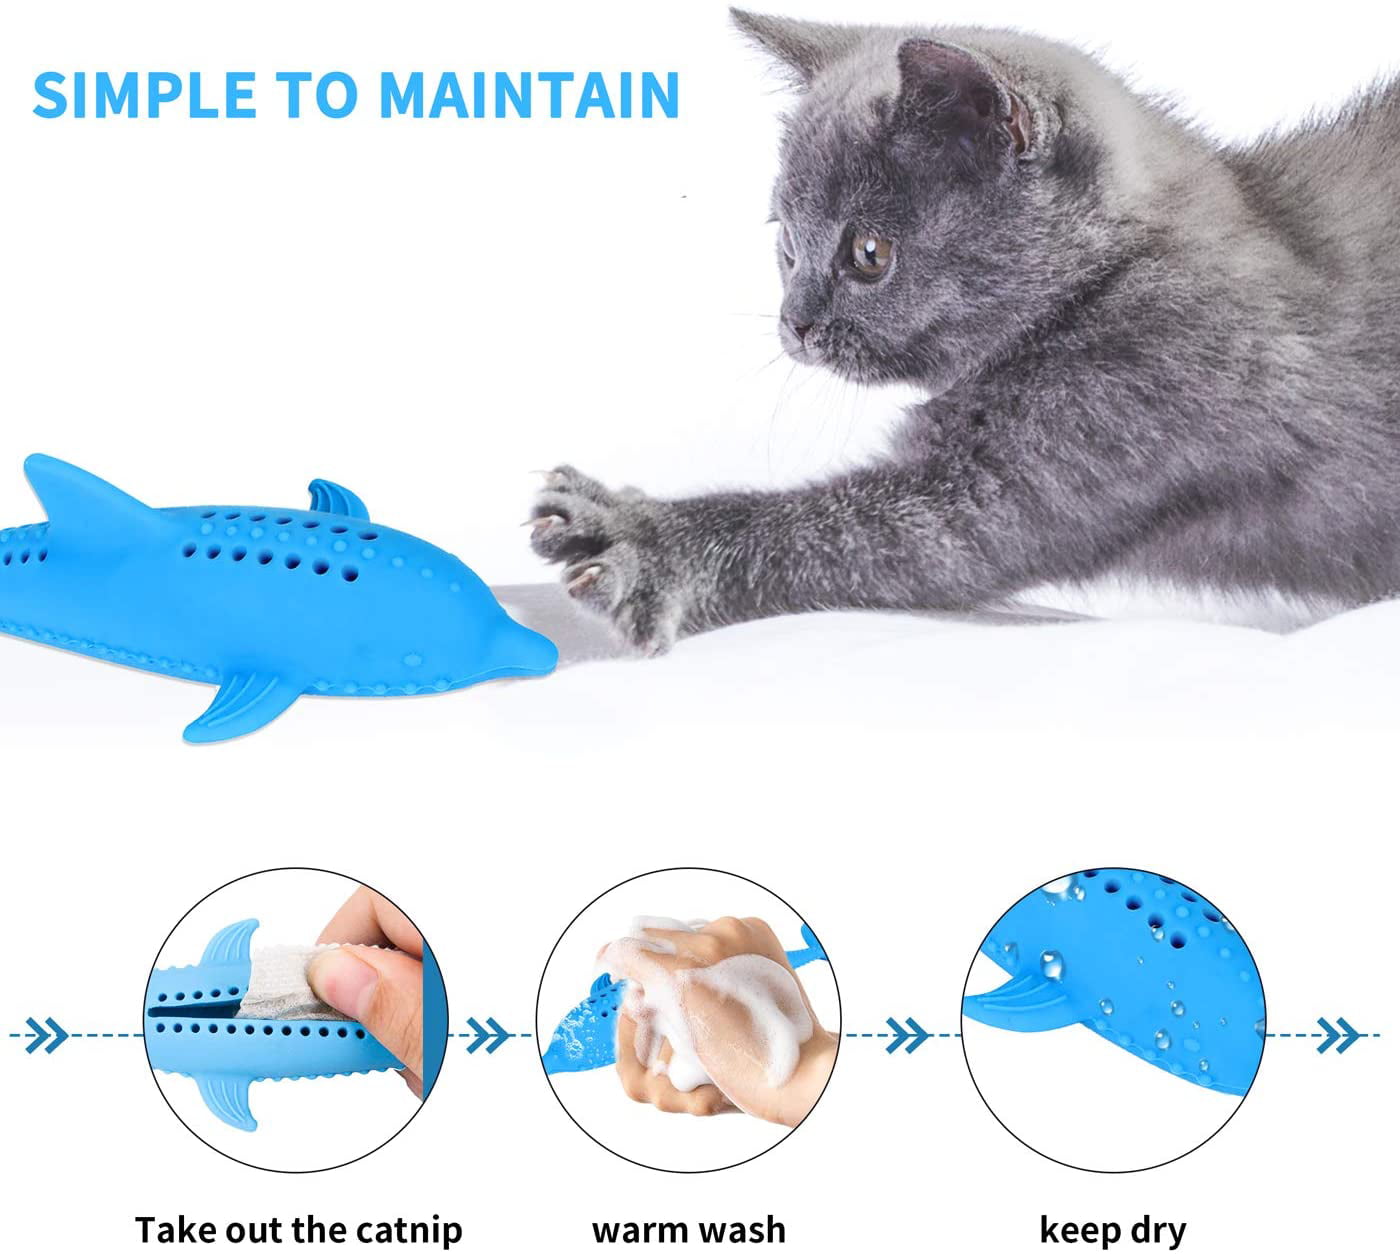 Food-Grade Silicone TEEPAO Refillable Catnip Toys for Cats Simulation Dolphin Shape Cat Toothbrush Kitten Teething Toy Chew Bite Supplies with Compressed Catnip Strip